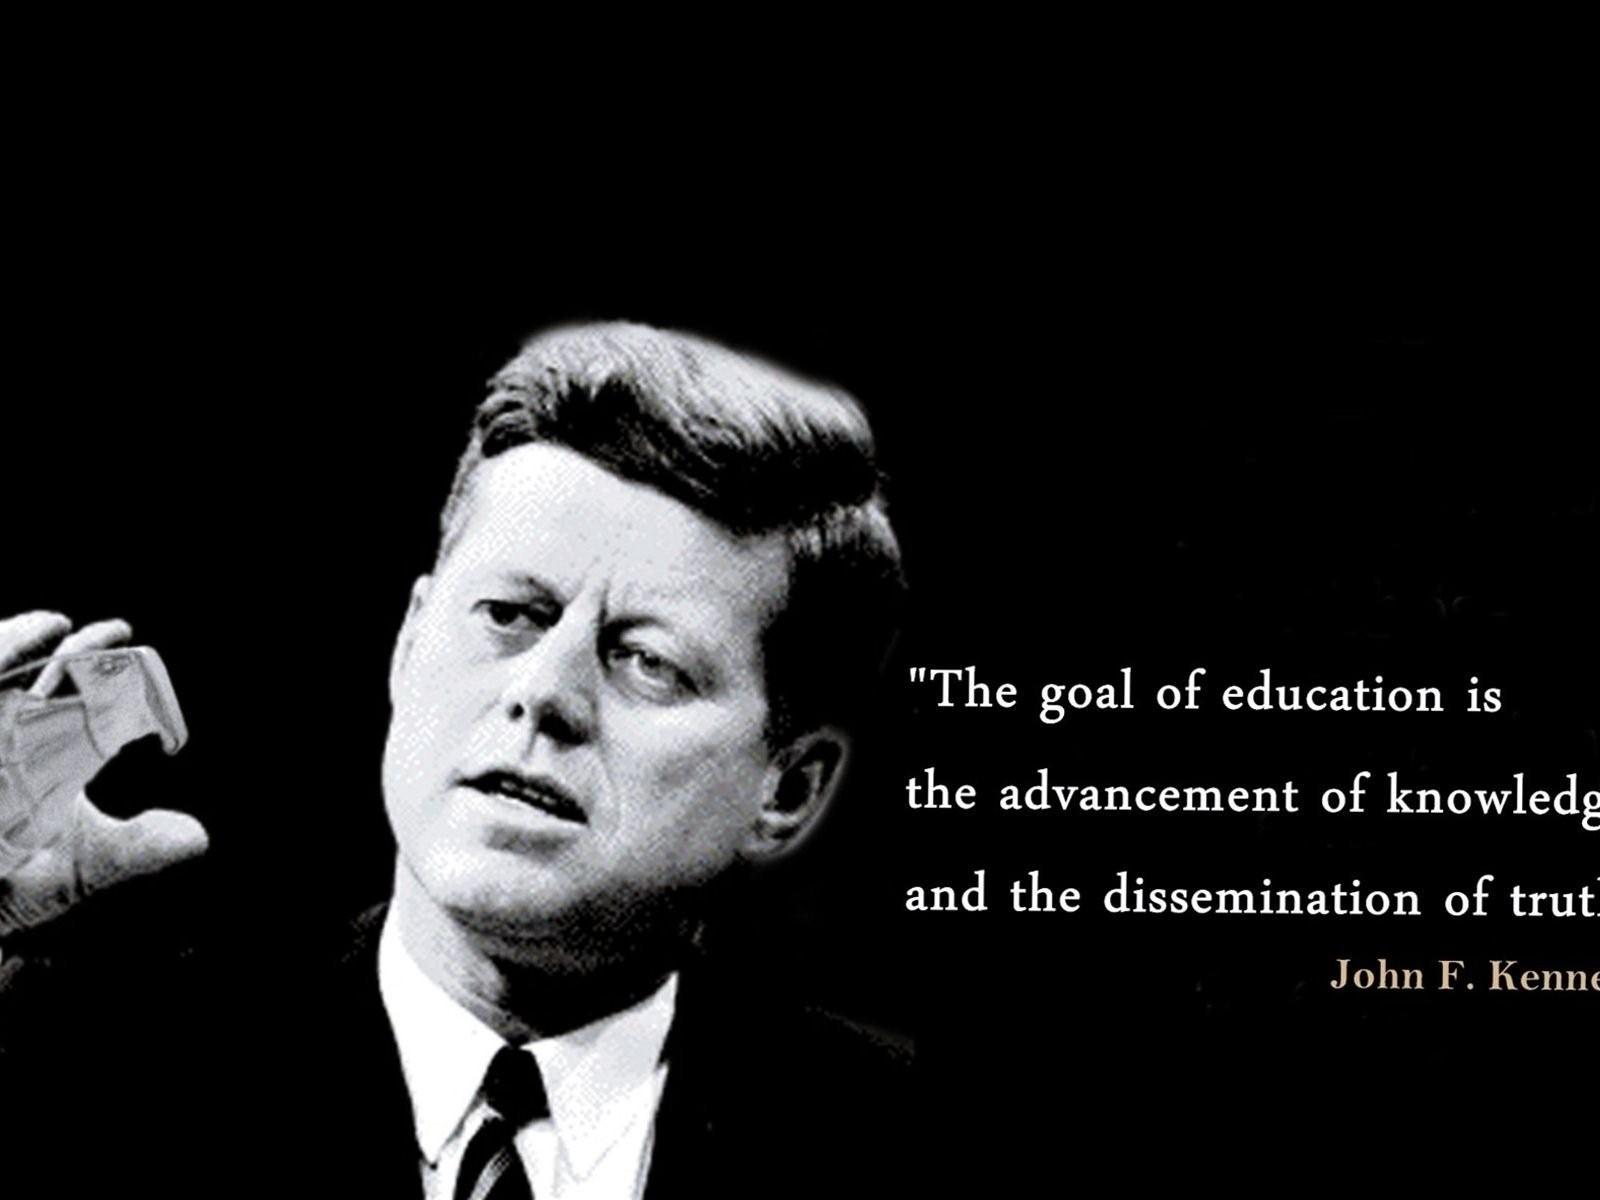 John F. Kennedy Education Quotes Wallpaper 00817